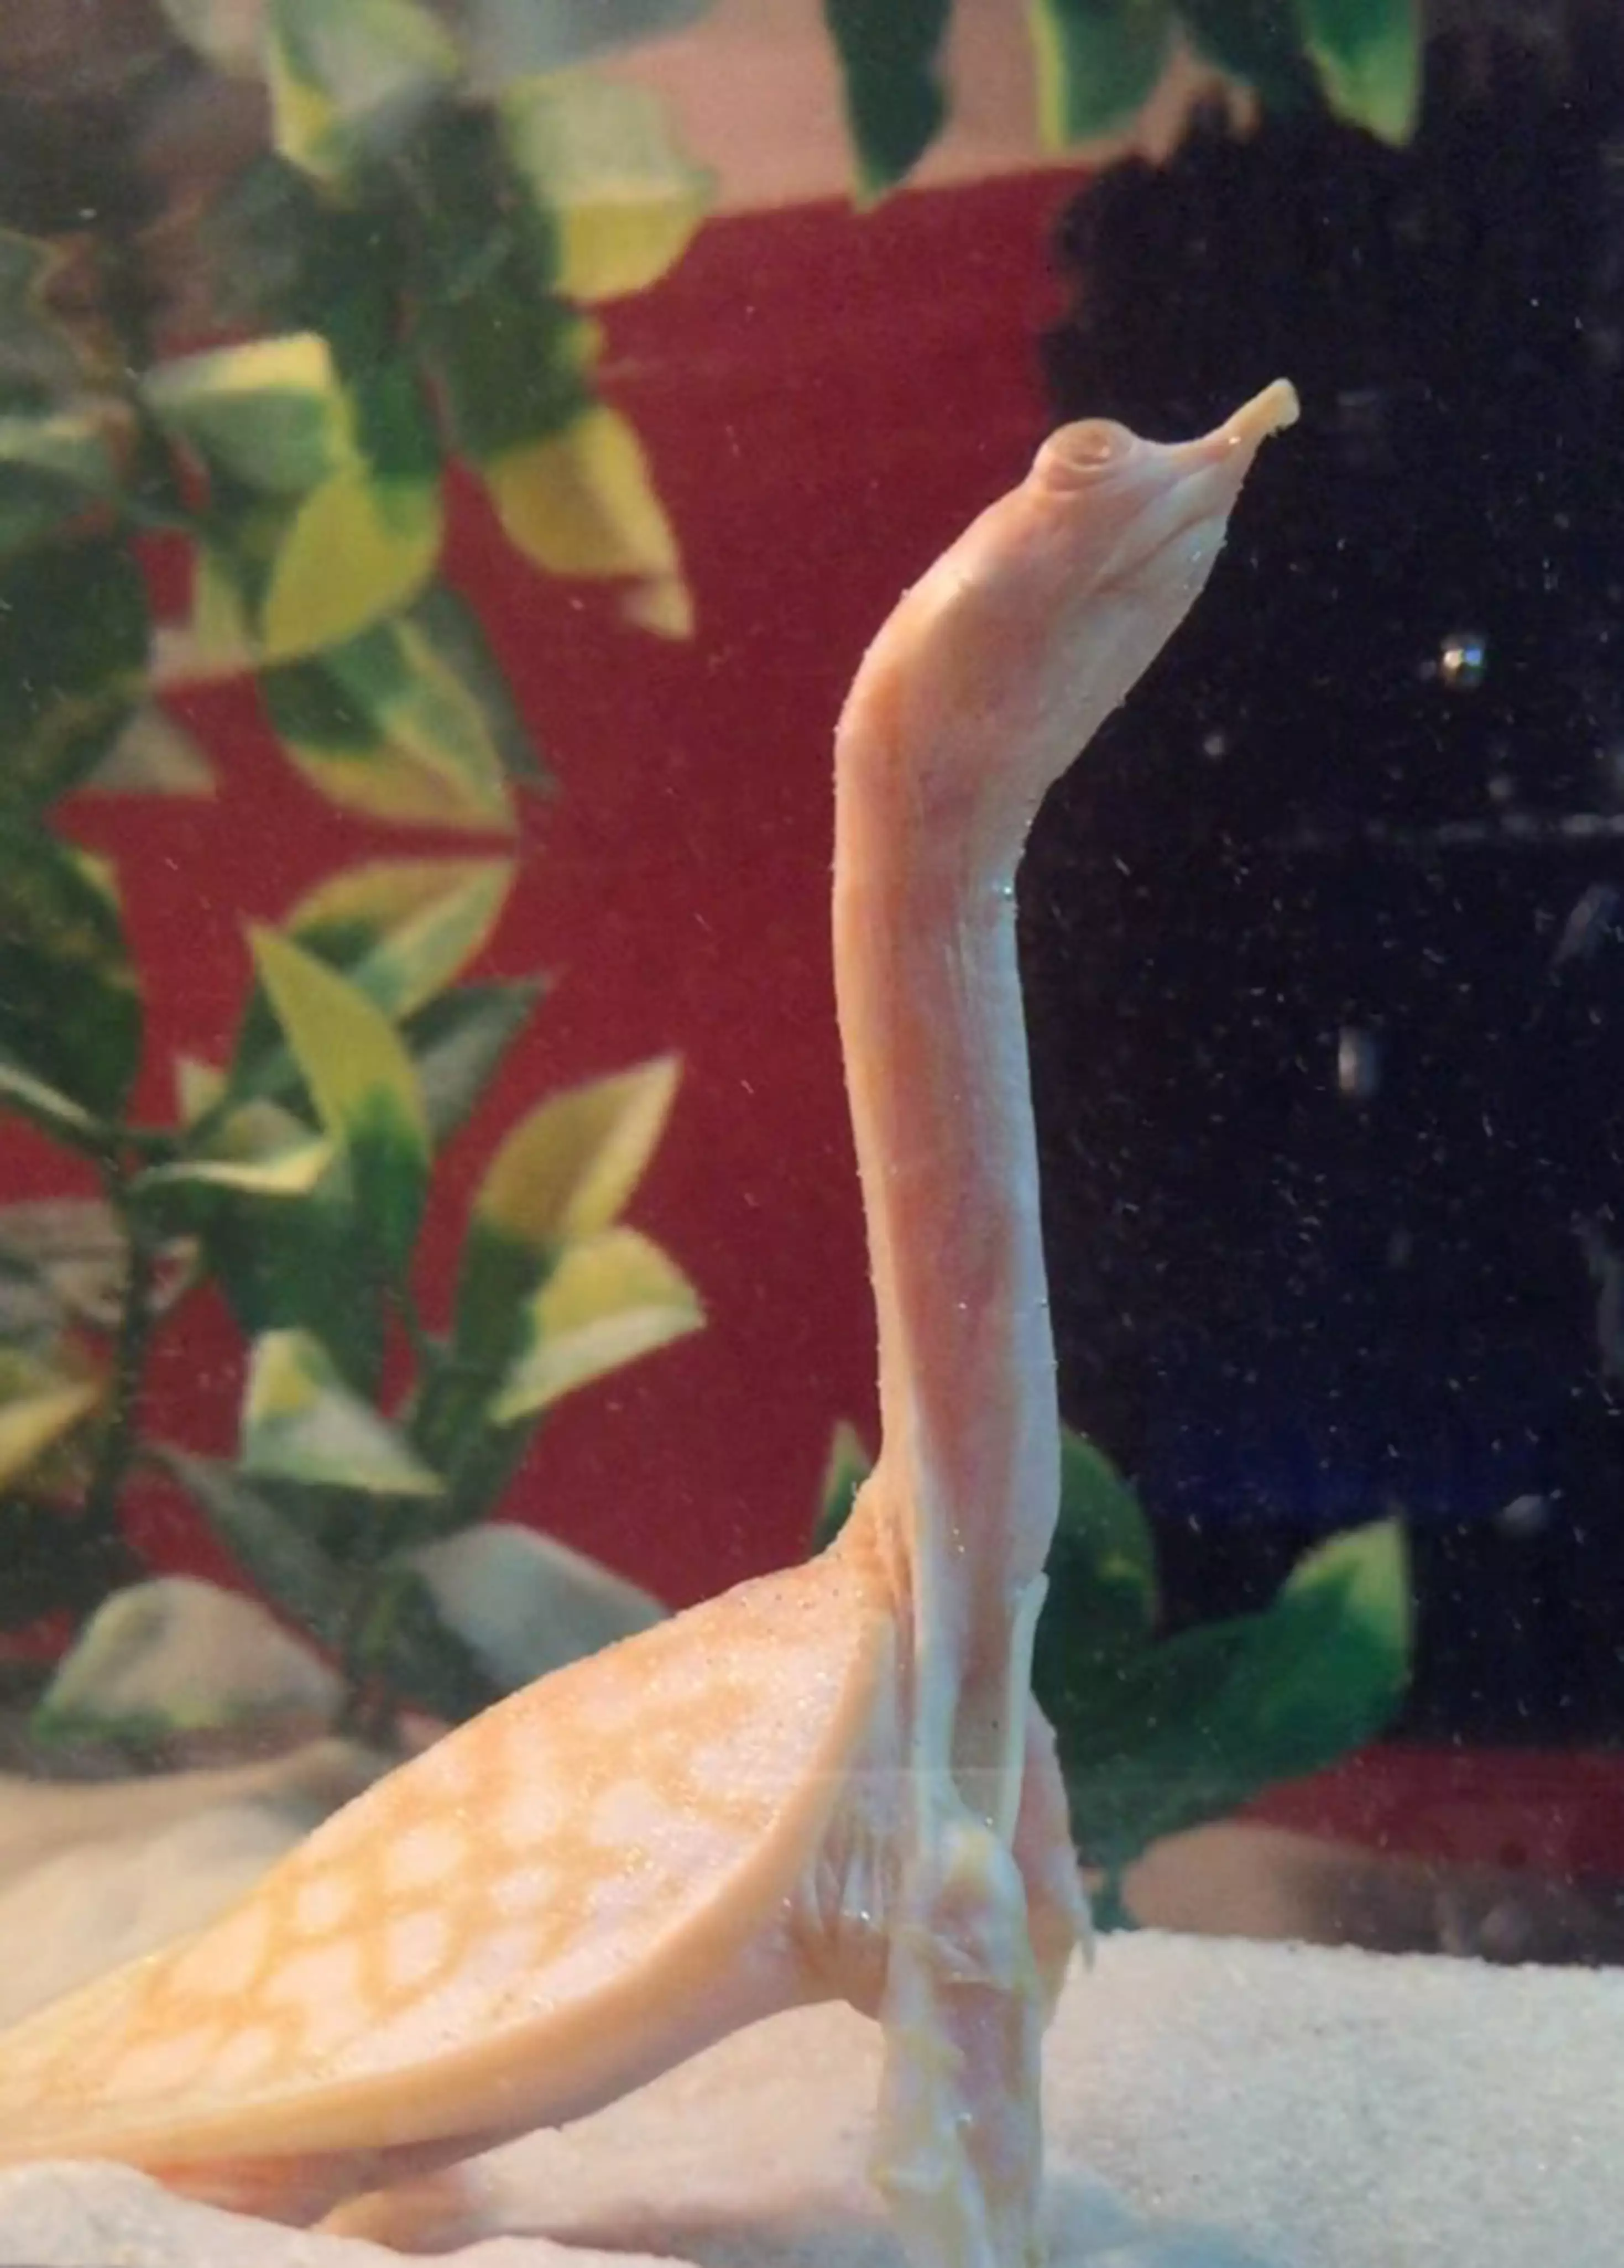 Her long neck makes her look like a mini dinosaur. (